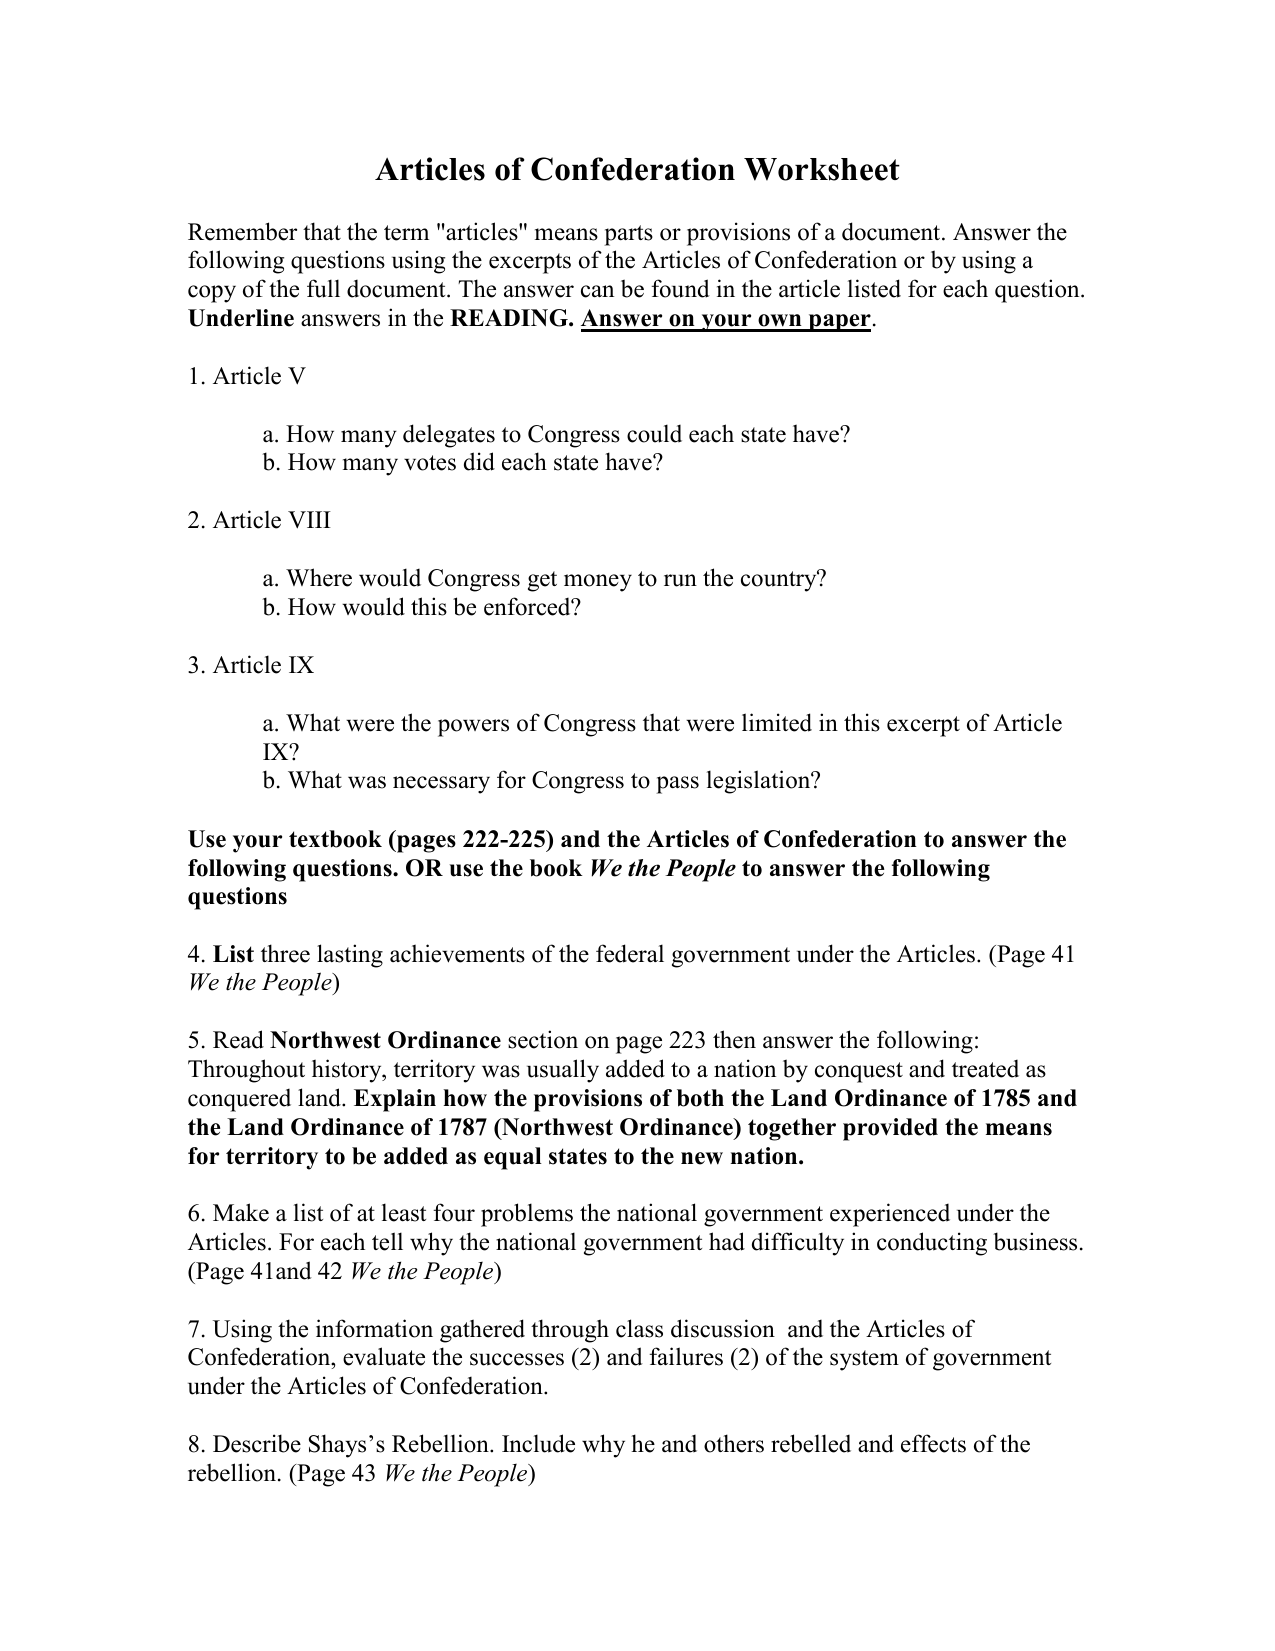 Articles Of Confederation Worksheet Answers